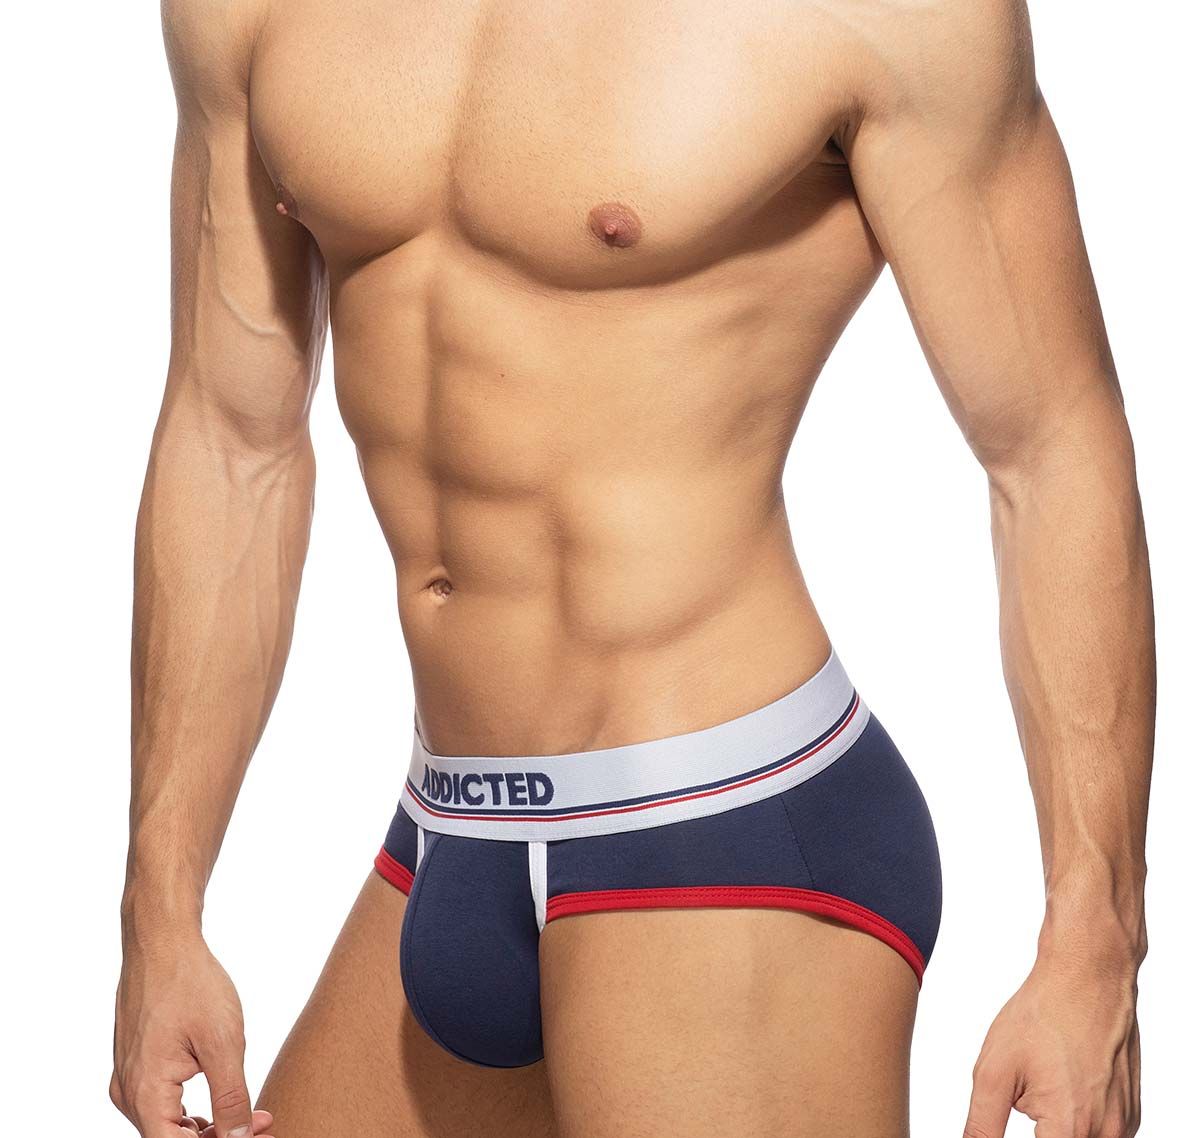 Addicted 3 Paquet Slips TOMMY 3 PACK BRIEF AD1008P, blanc/rouge/bleu marine